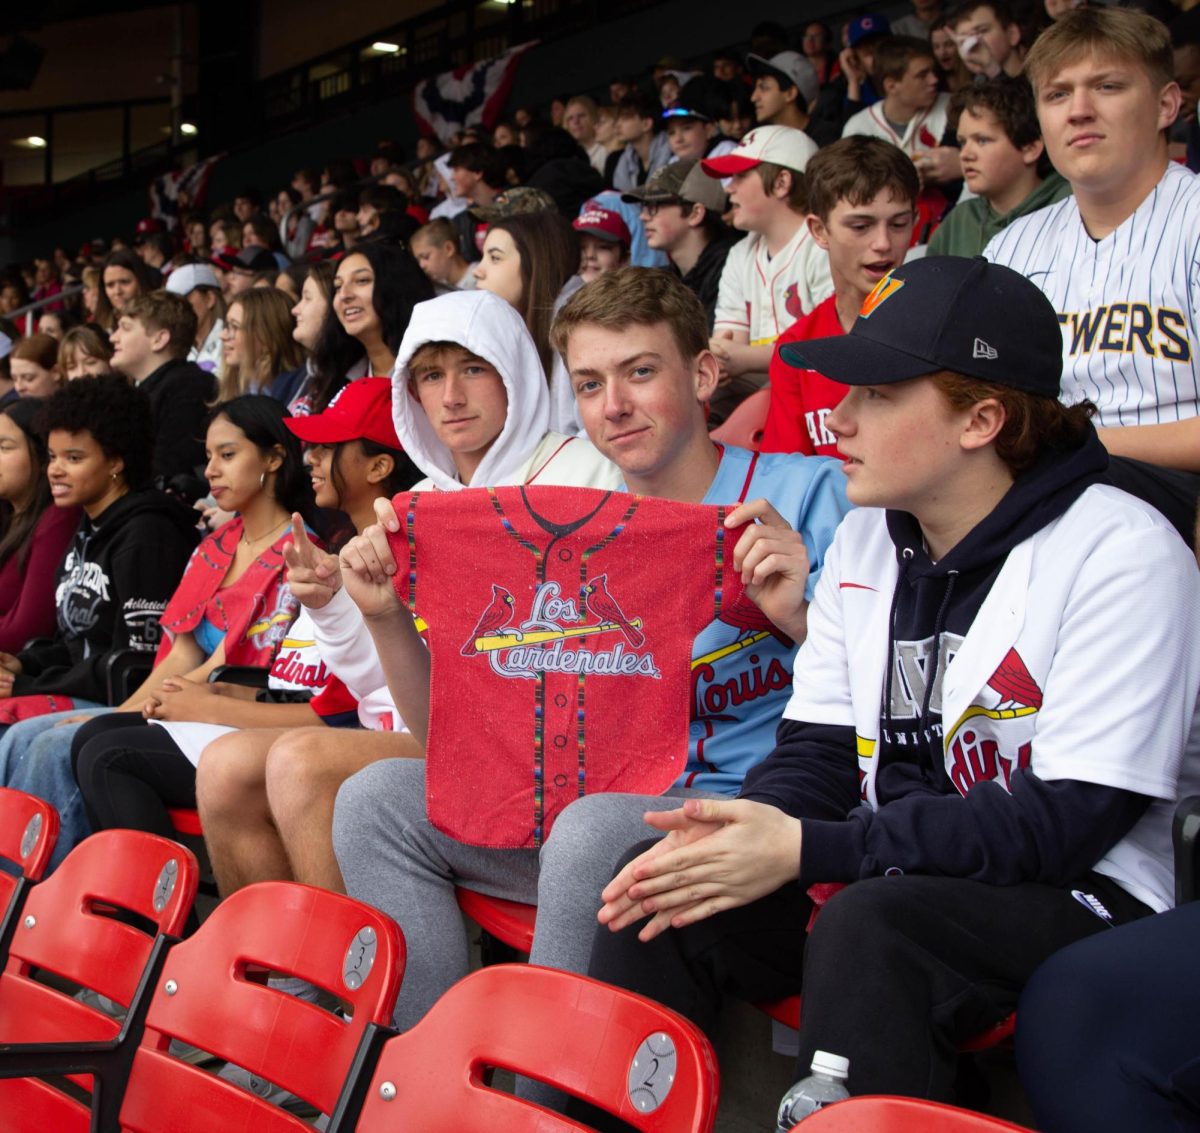 Junior Owen Witte shows the free jersey towel students received that says Los Cardenales. 